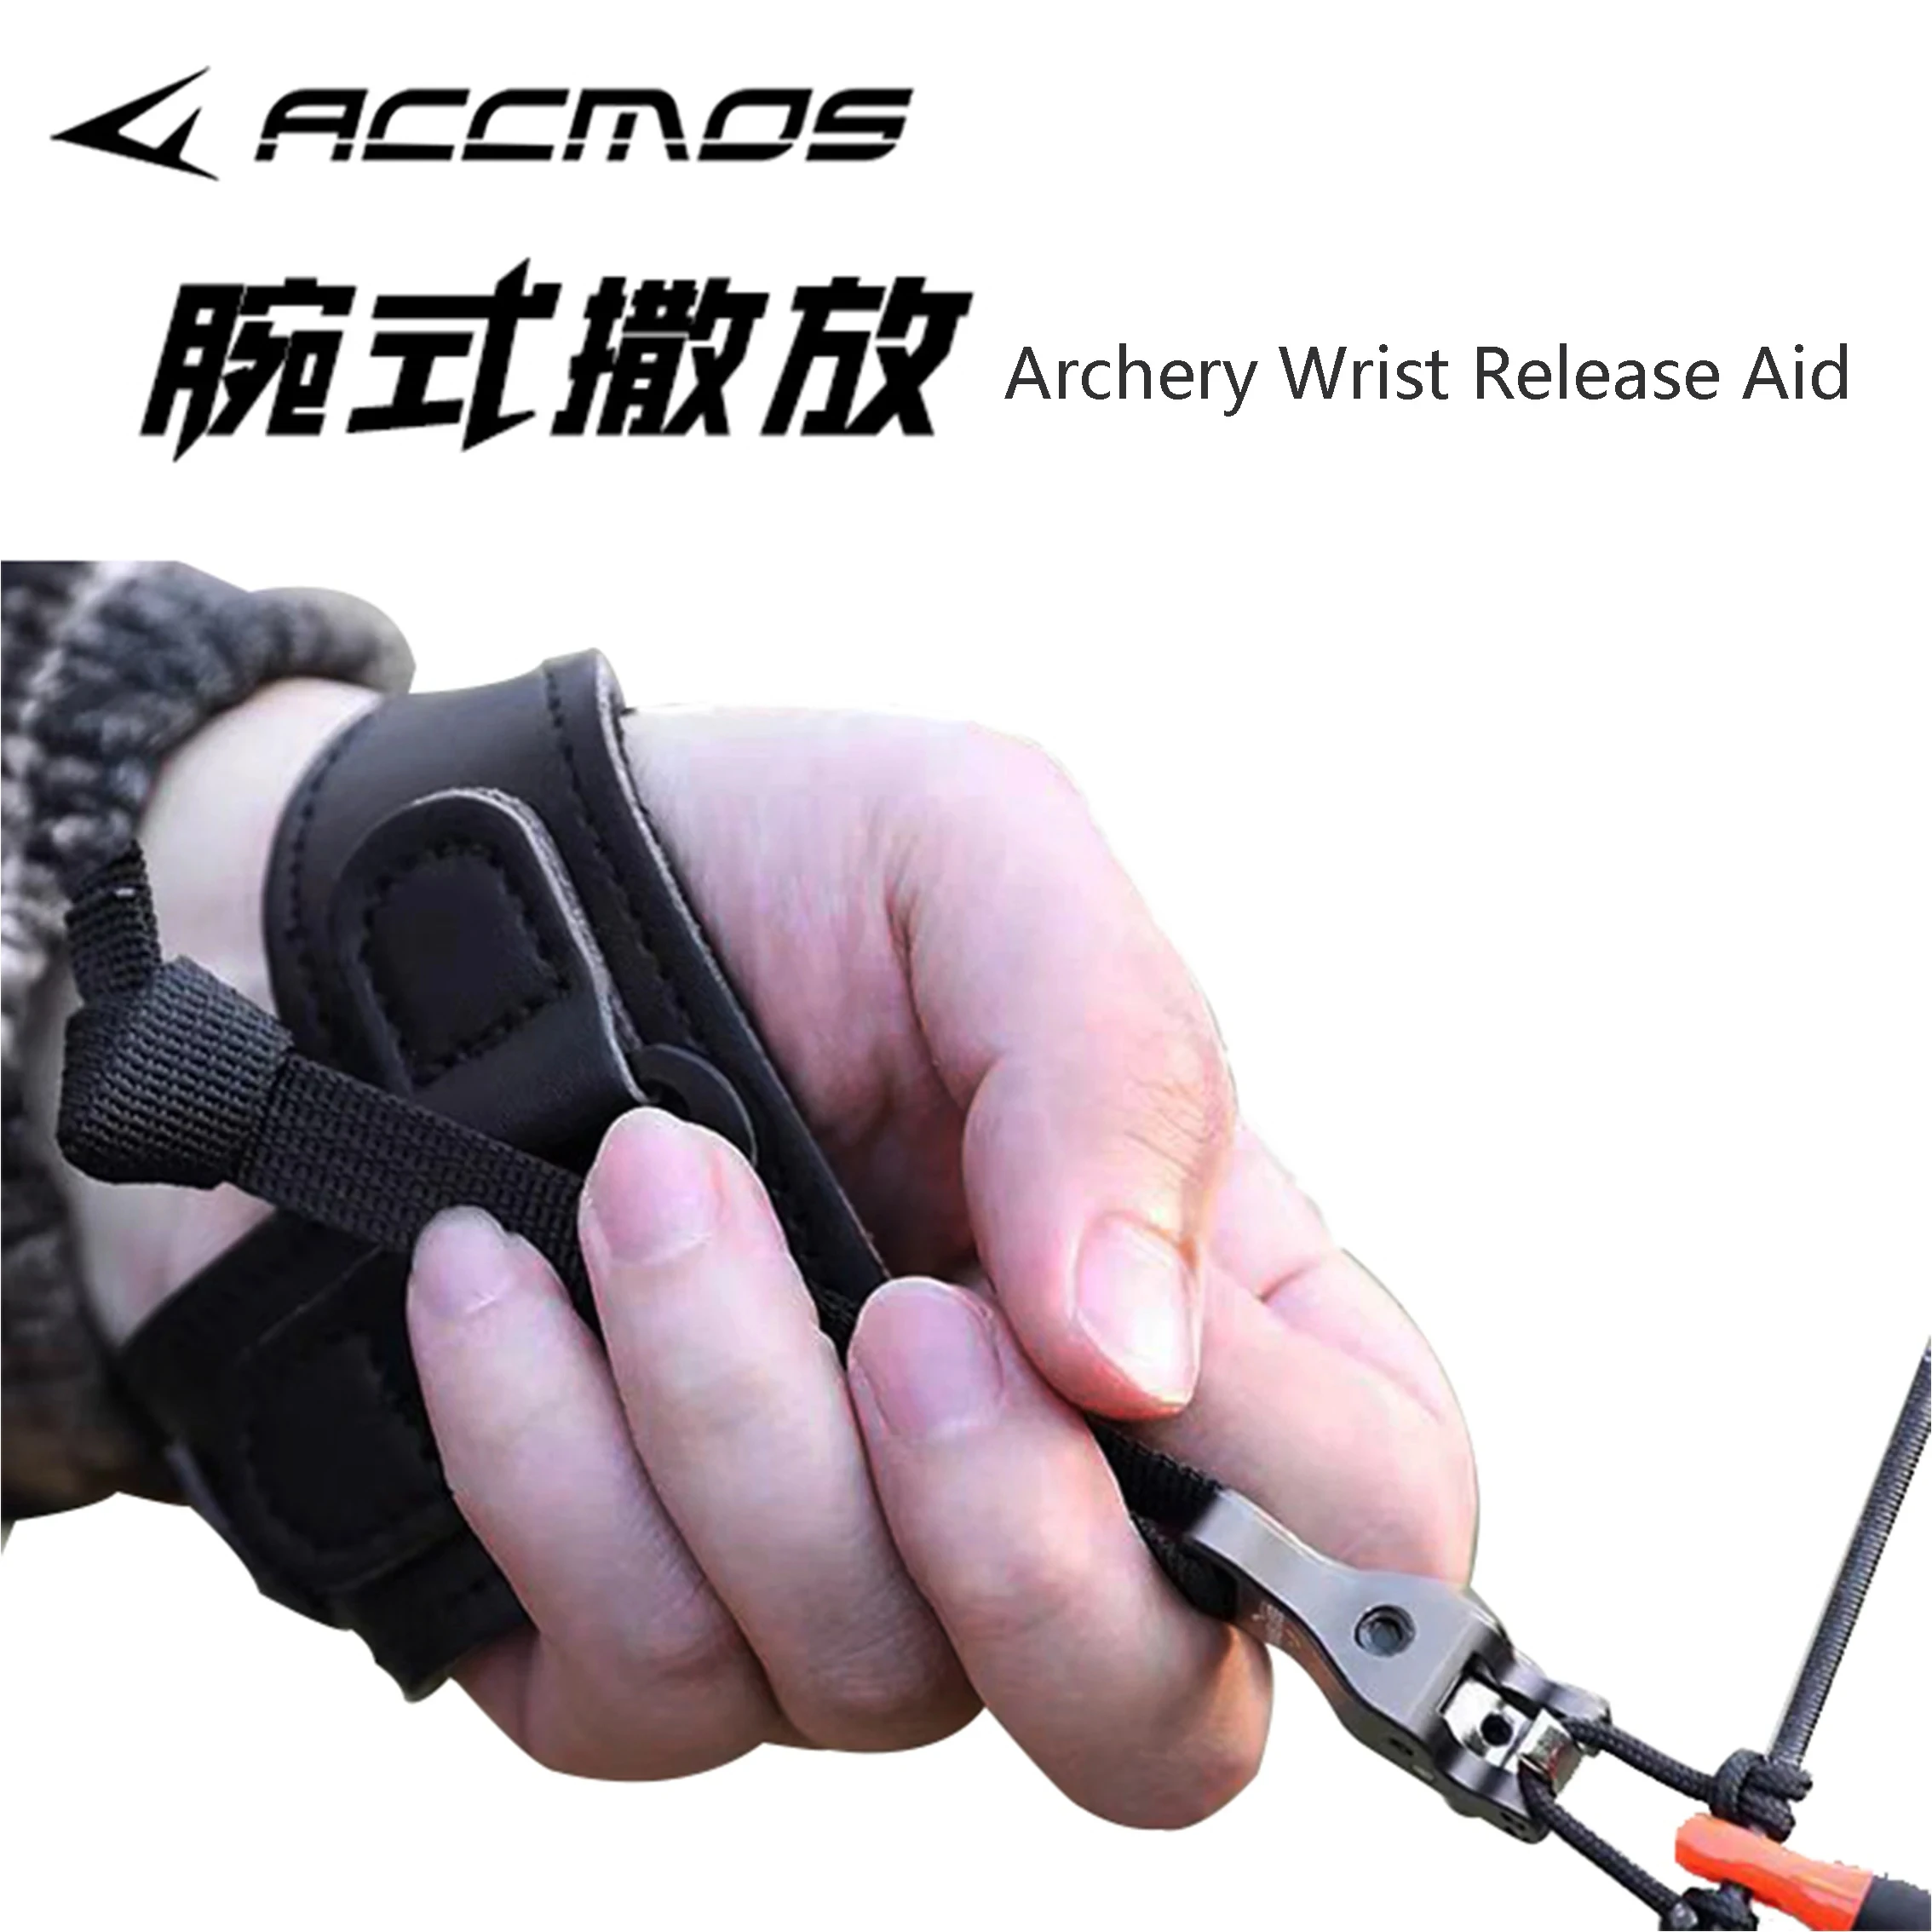 

Archery Caliper Release Aid Compound Bow Strap Shooting Arrow Trigger Wristband Archery Bow Hunting Shooting Accessory